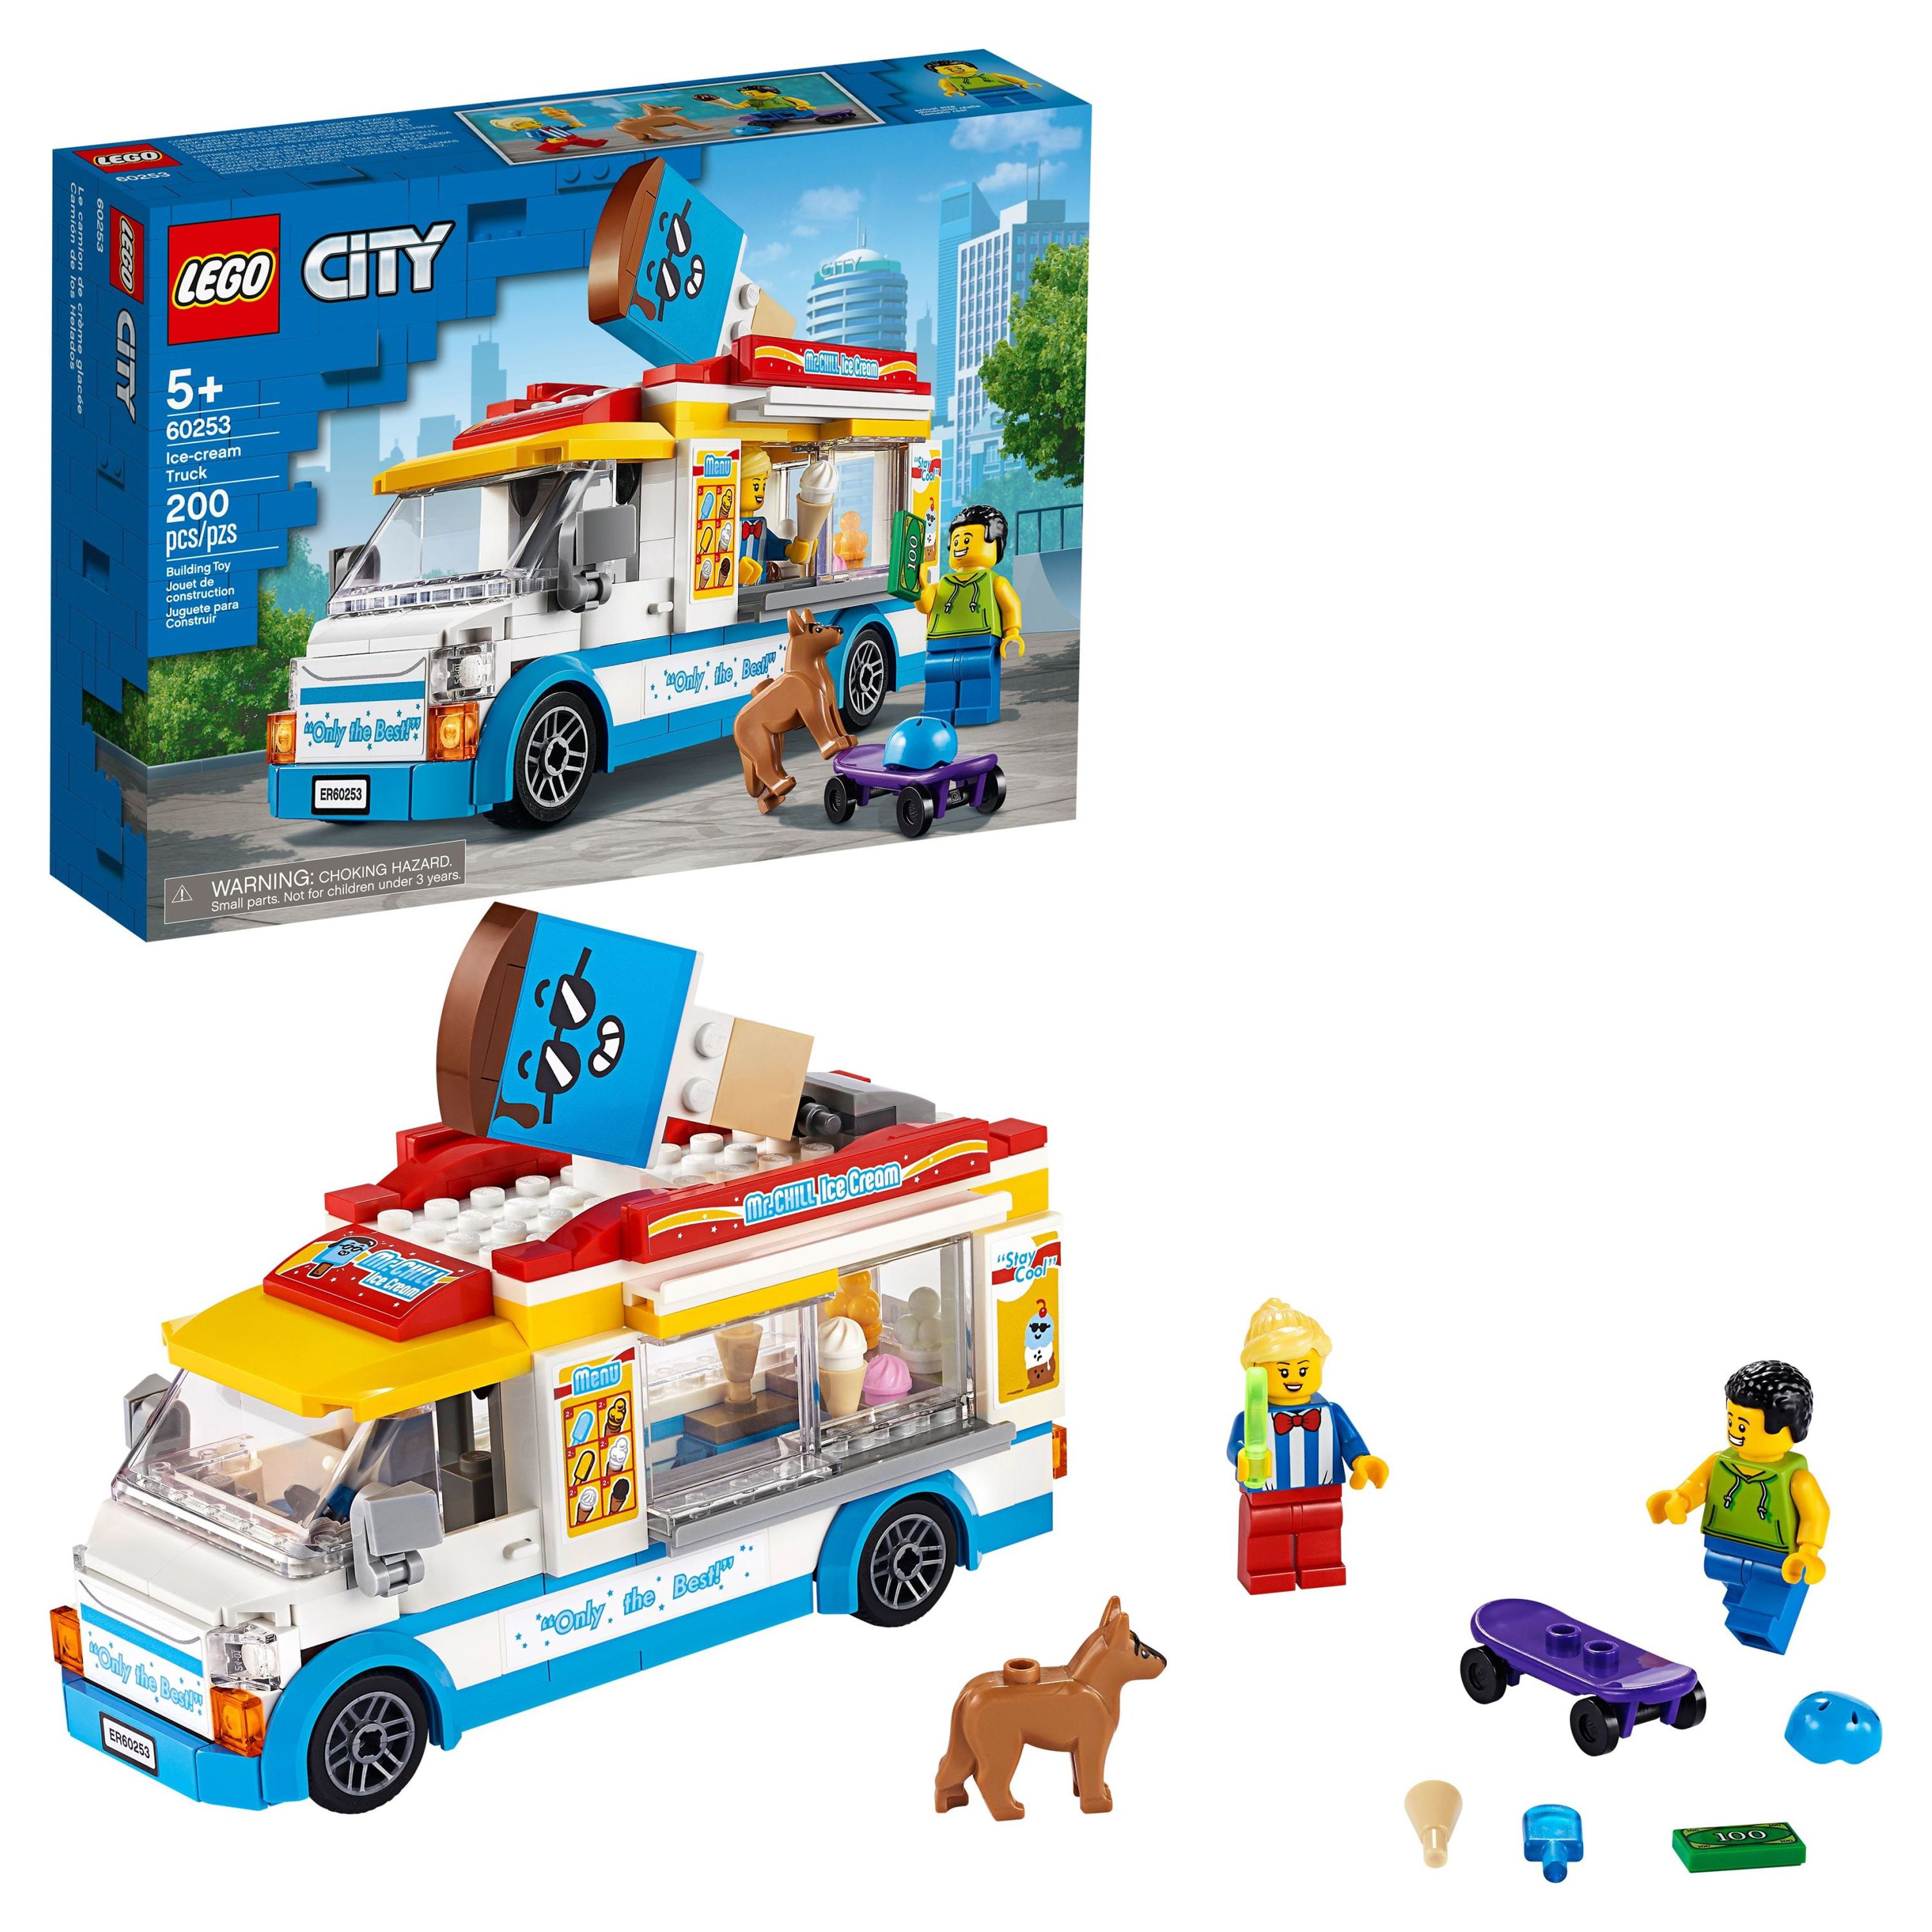 LEGO City Ice Cream Truck Van 60253 Building Toy Set - Featuring Skater Minifigures, Skateboard, and Dog Figure, Fun Gift Idea for Boys, Girls, and Kids Ages 5+ - image 1 of 10